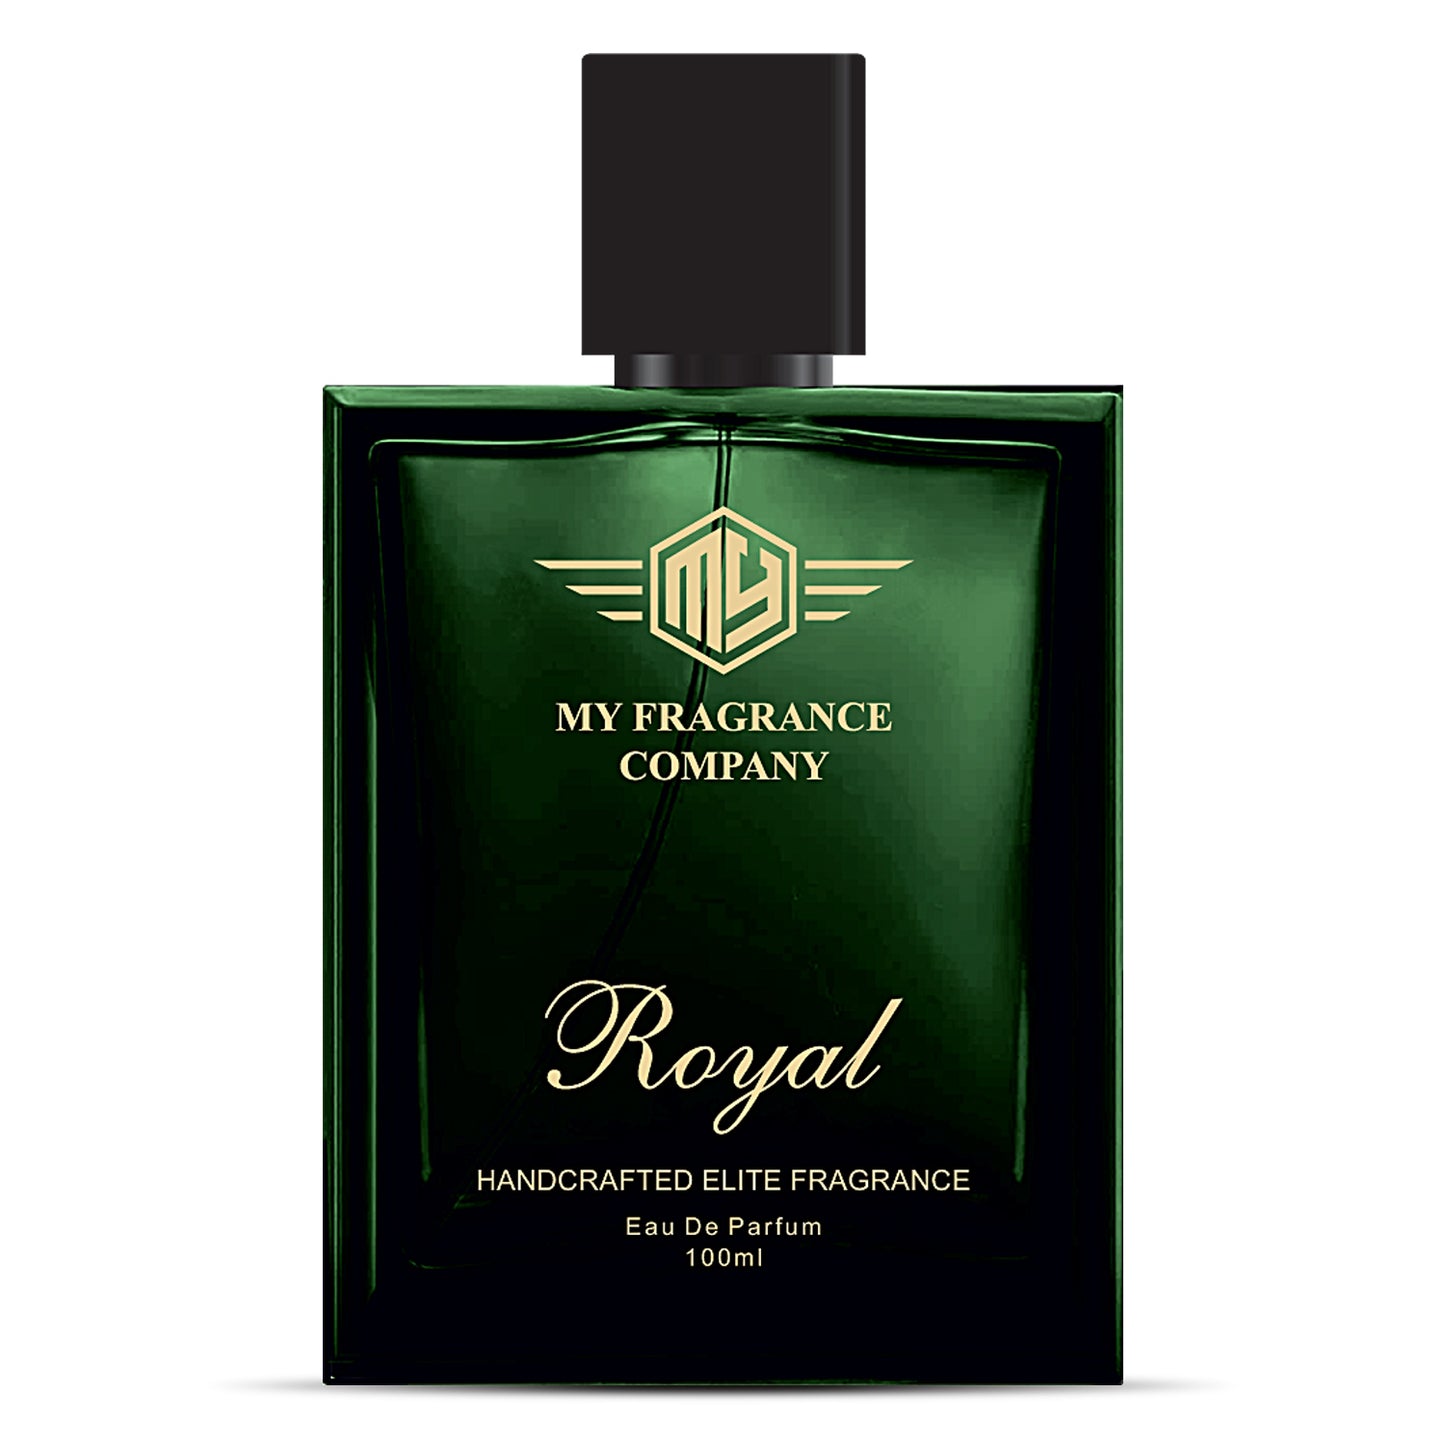 Handcrafted Royal Elite Fragrance EDP Perfume 100ml and Premium Deodorant| (2 Items in the one set)